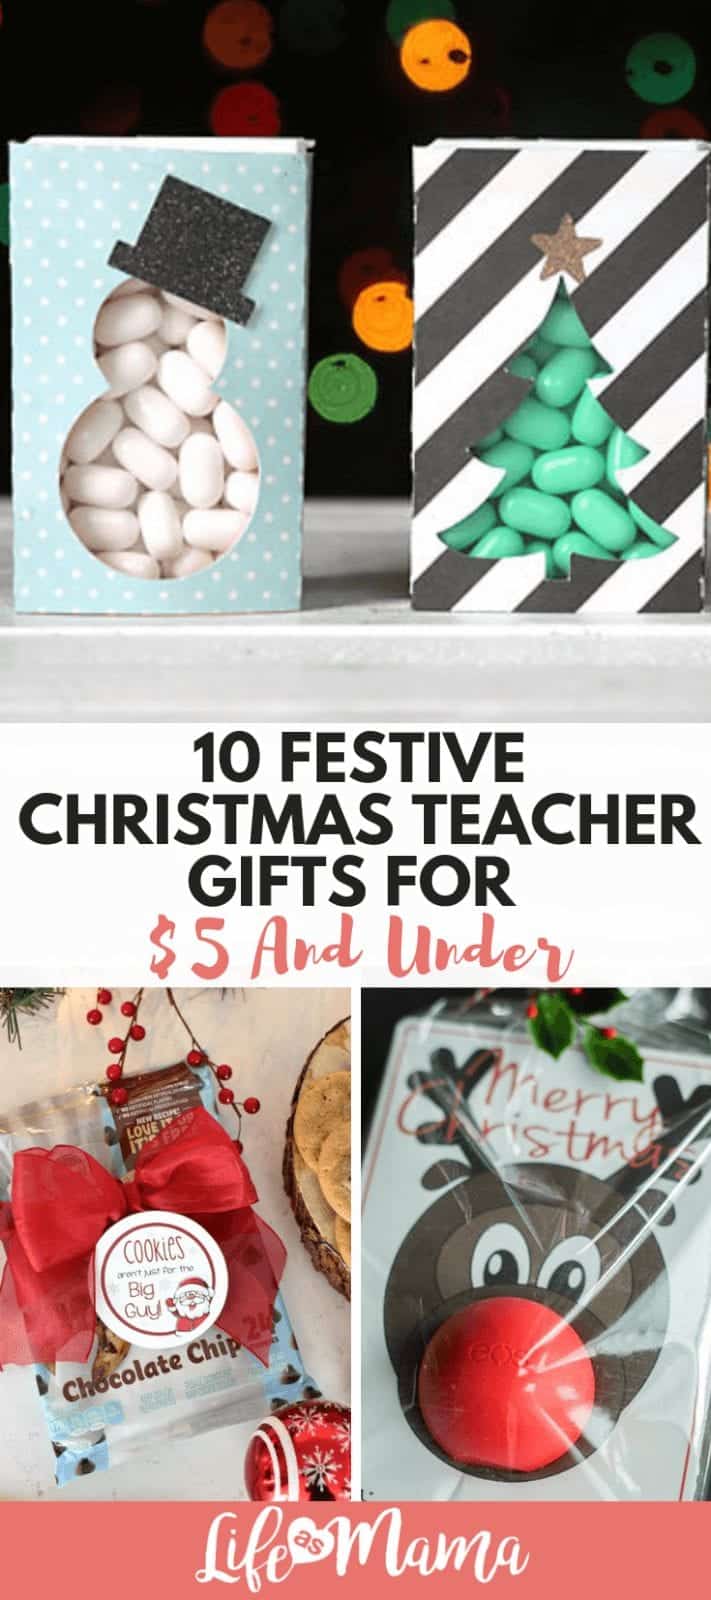 10 Festive Christmas Teacher Gifts For $5 And Under